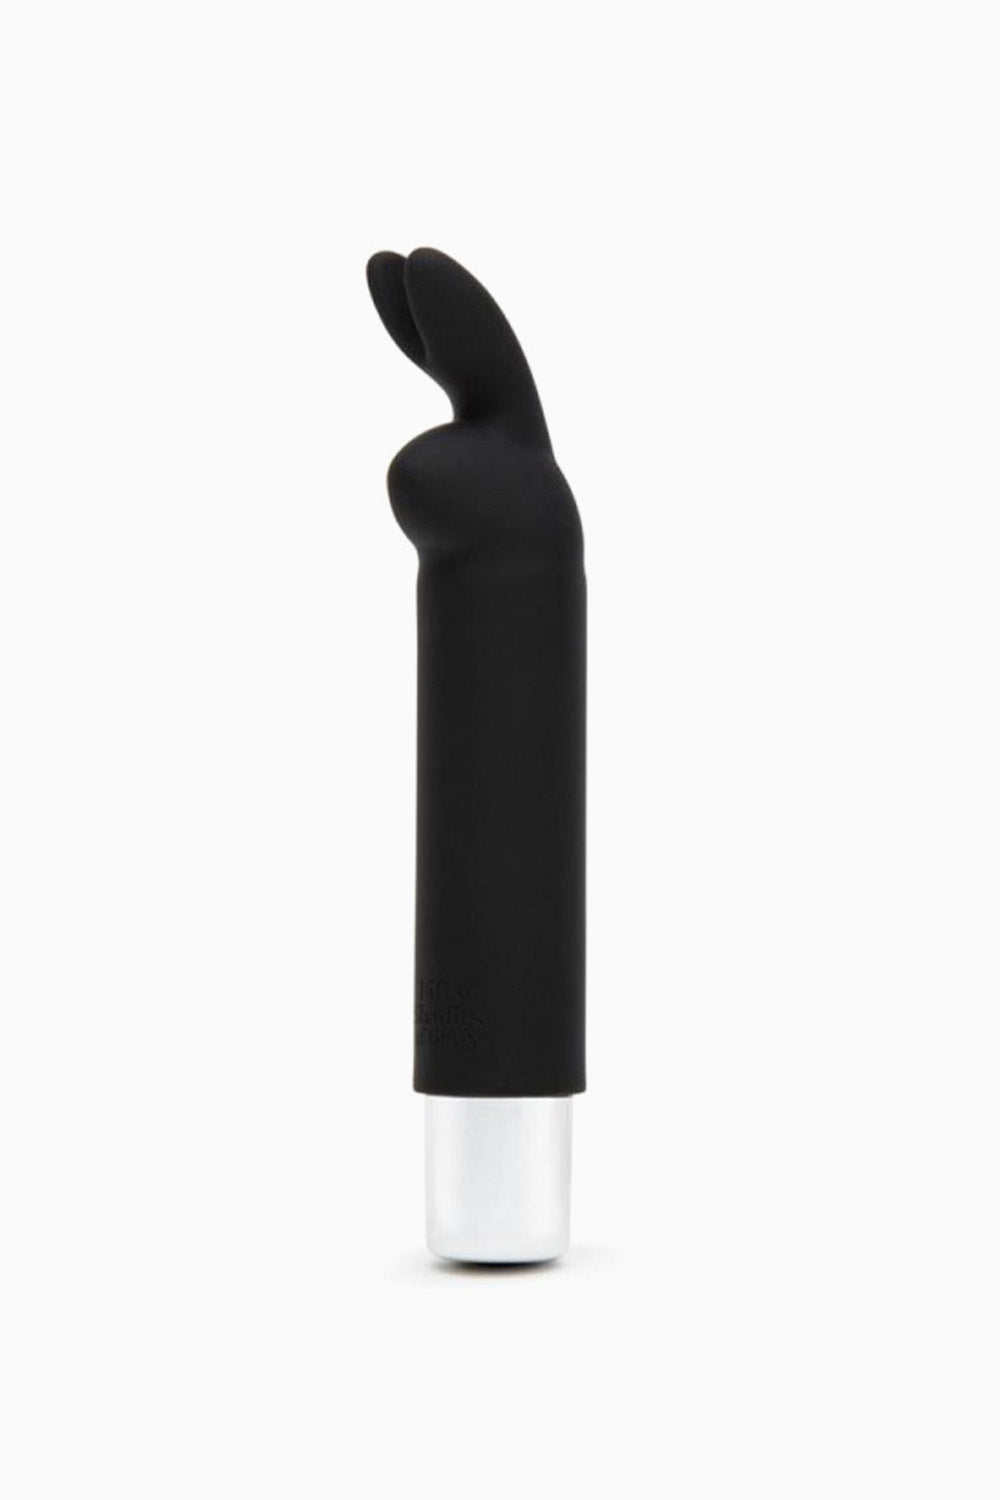 Fifty Shades of Grey Greedy Girl Rechargeable Bullet Rabbit Vibrator, 5 Inches